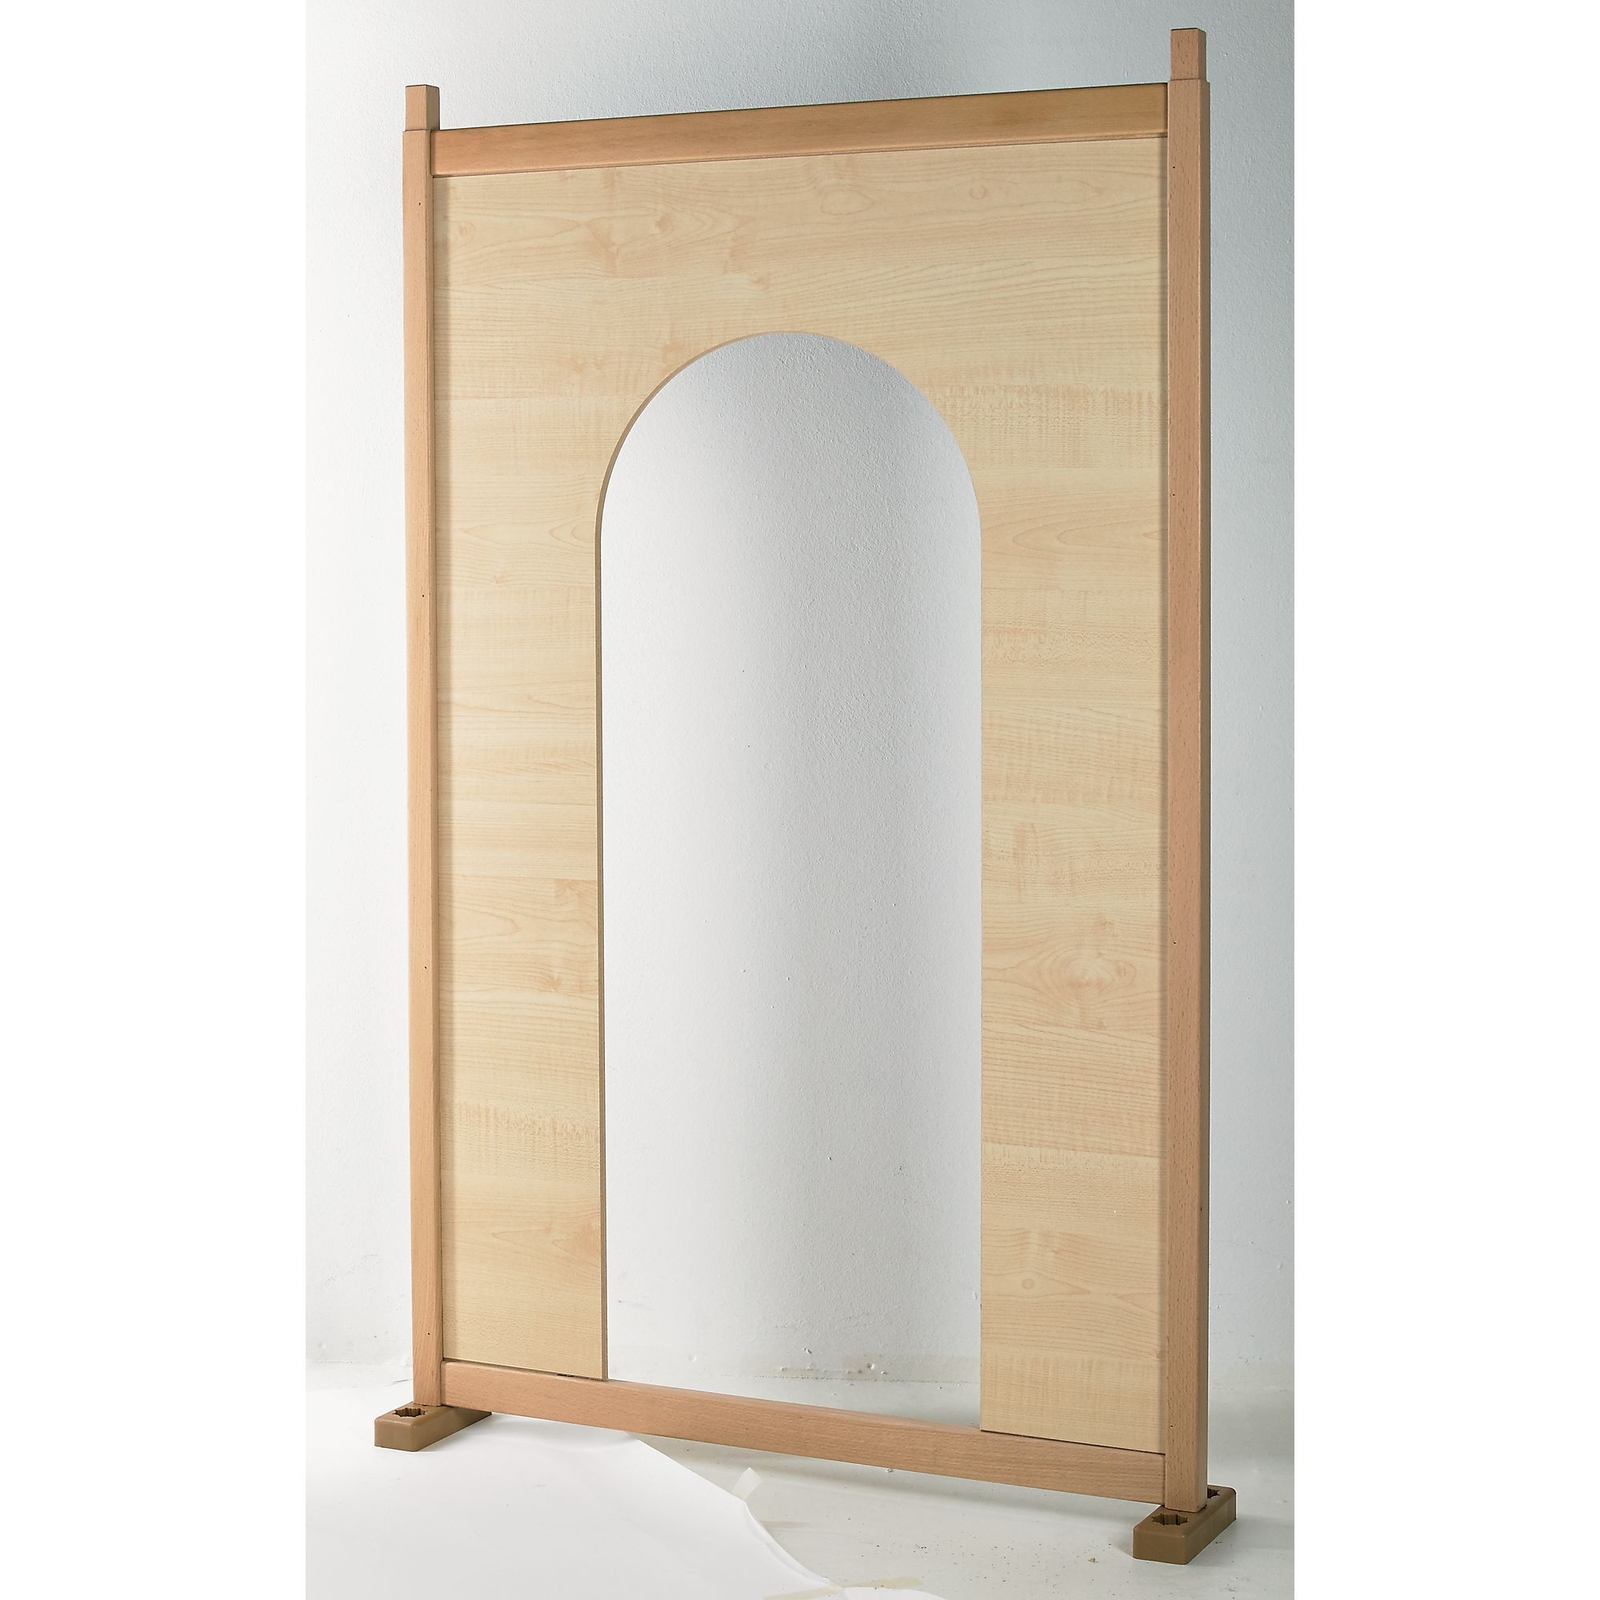 Millhouse Wooden Maple Effect Archway Play Panels - 1290 x 790mm - Each